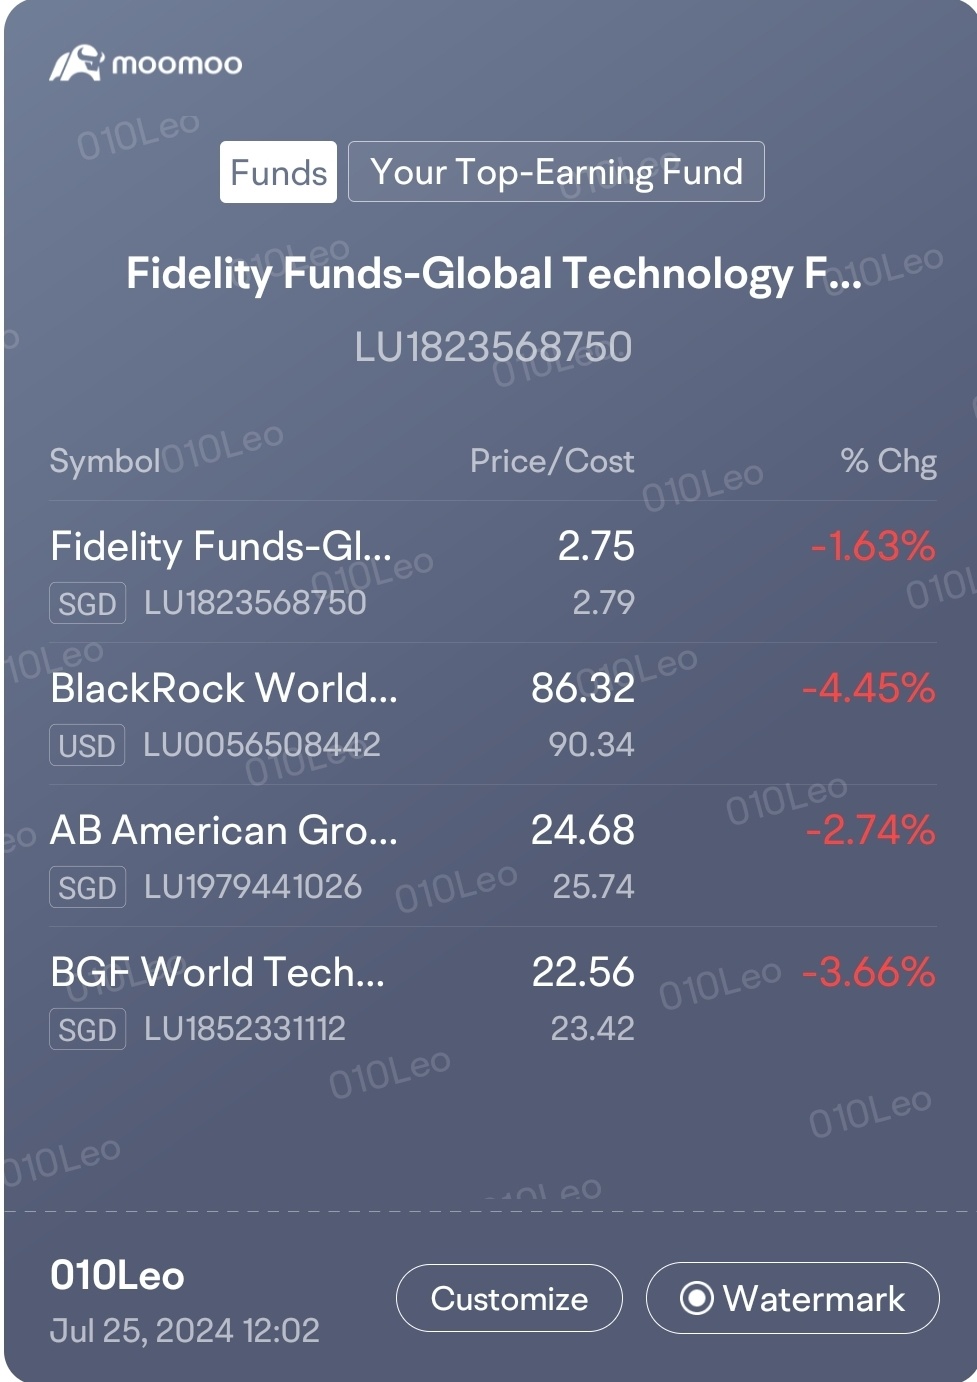 bloodshed... funds down due to the recent collapse in several tech... yesterday seems whole us market down... sgx also down now... maybe slowly dca